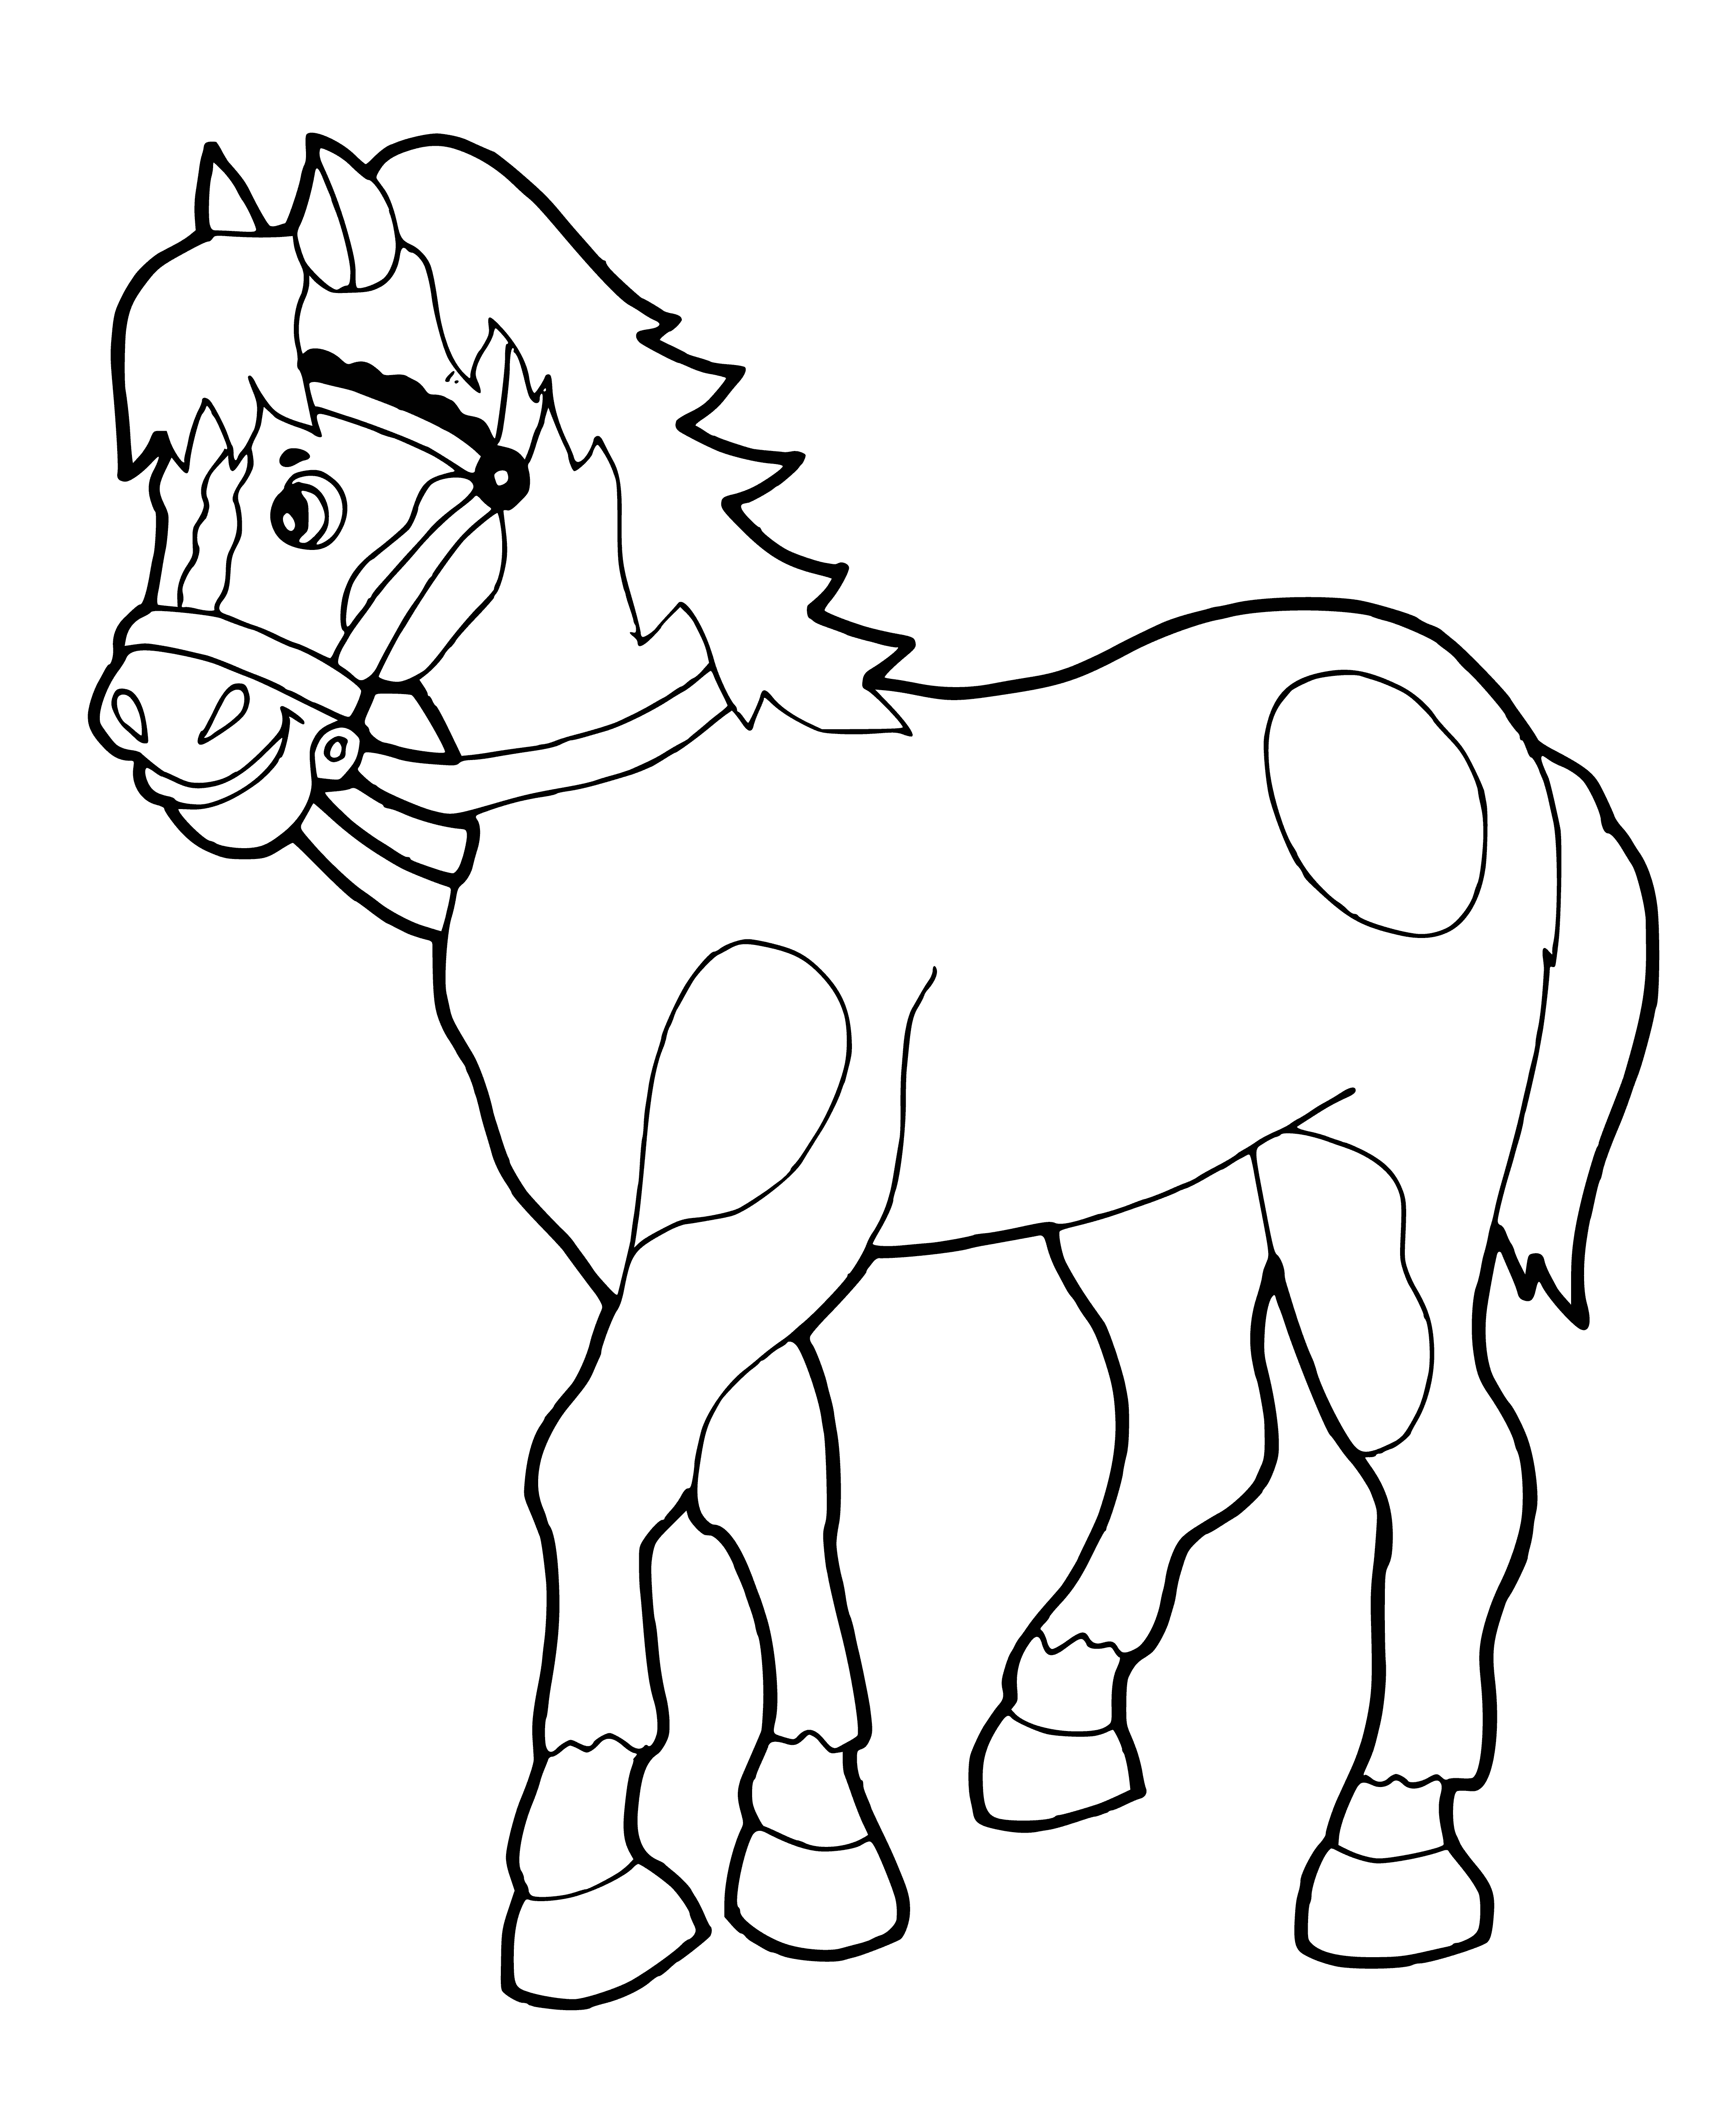 coloring page: A horse is a beautiful, noble creature, strong and muscular with a long neck, shiny coat, and thick mane.